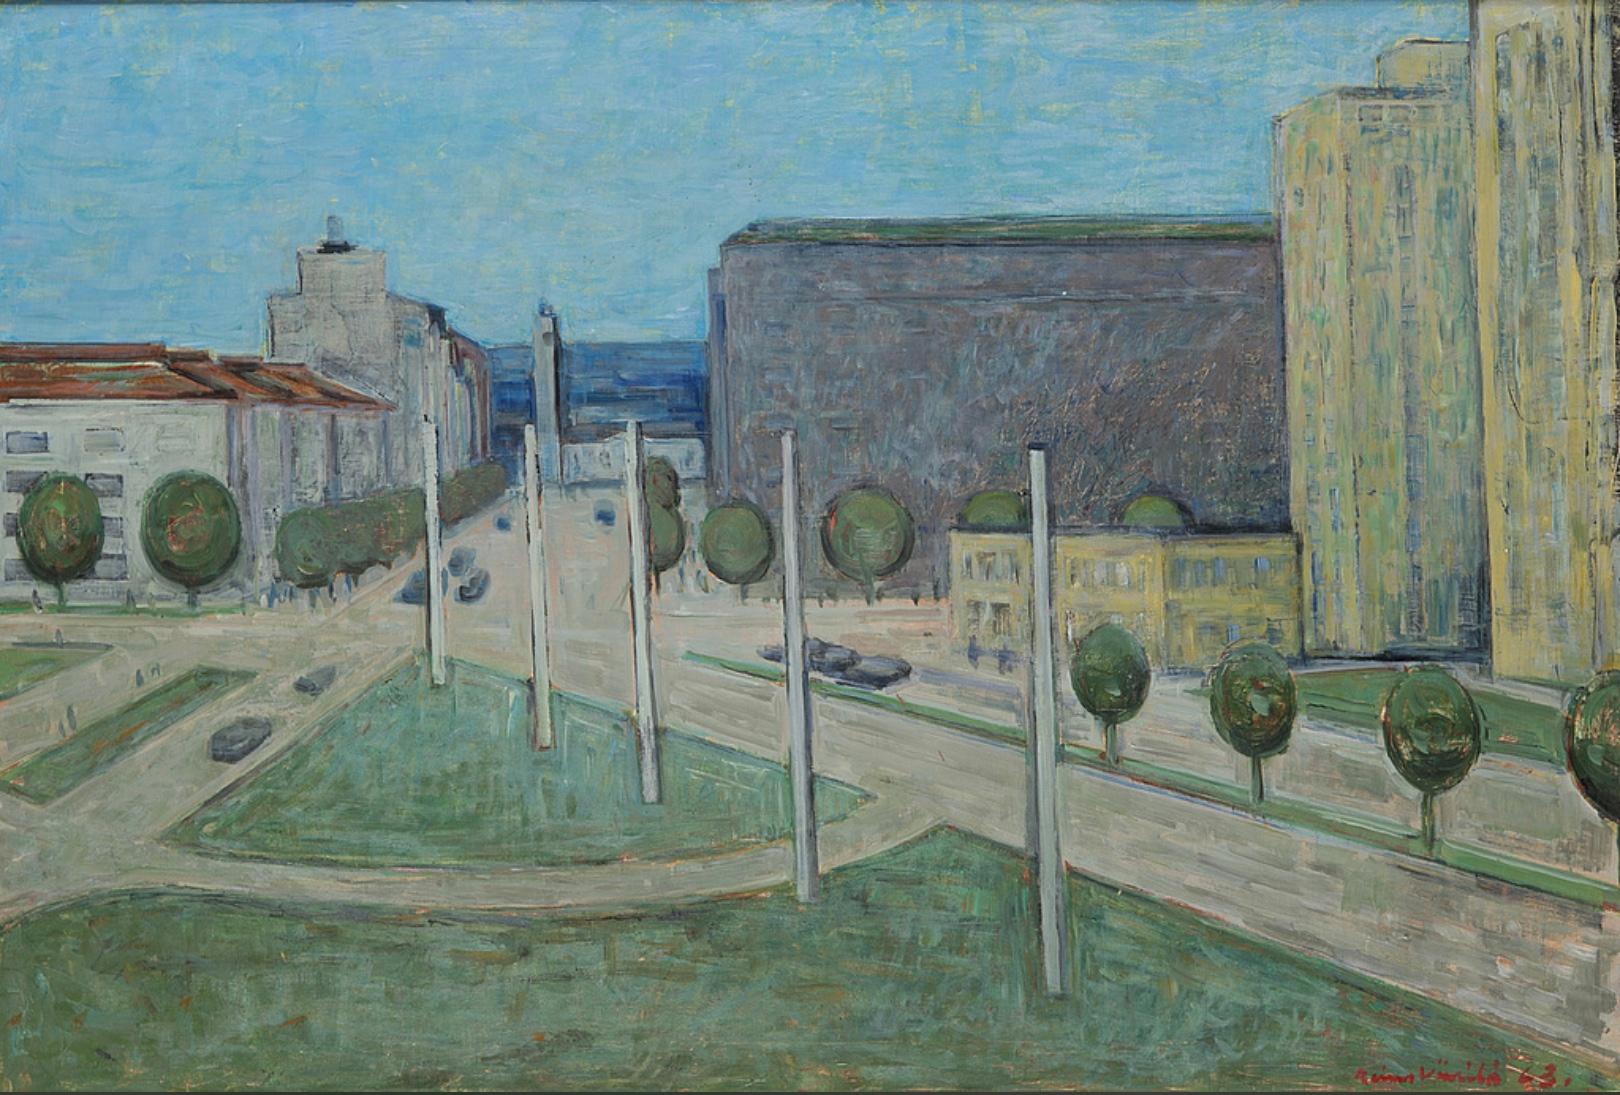 An imposing 1960s landscape view of the city of Tampere, Finland known as the sauna capital of the world.  The painting shows tree lined streets leading out to the sea which is in the distant background. Painted, in gentle tones of greens and blues